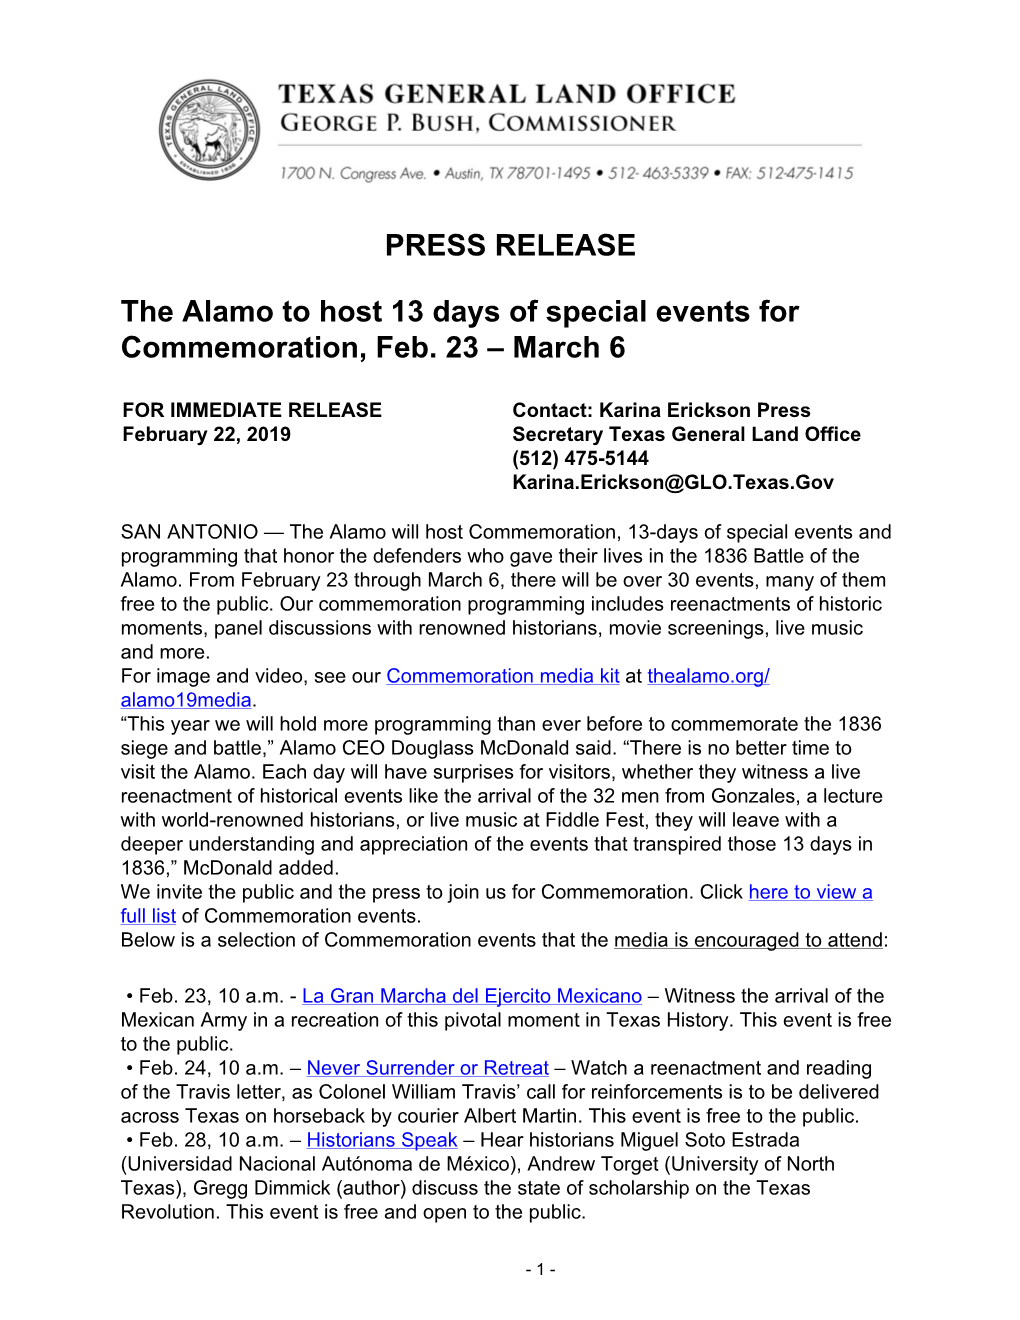 PRESS RELEASE the Alamo to Host 13 Days of Special Events for Commemoration, Feb. 23 – March 6